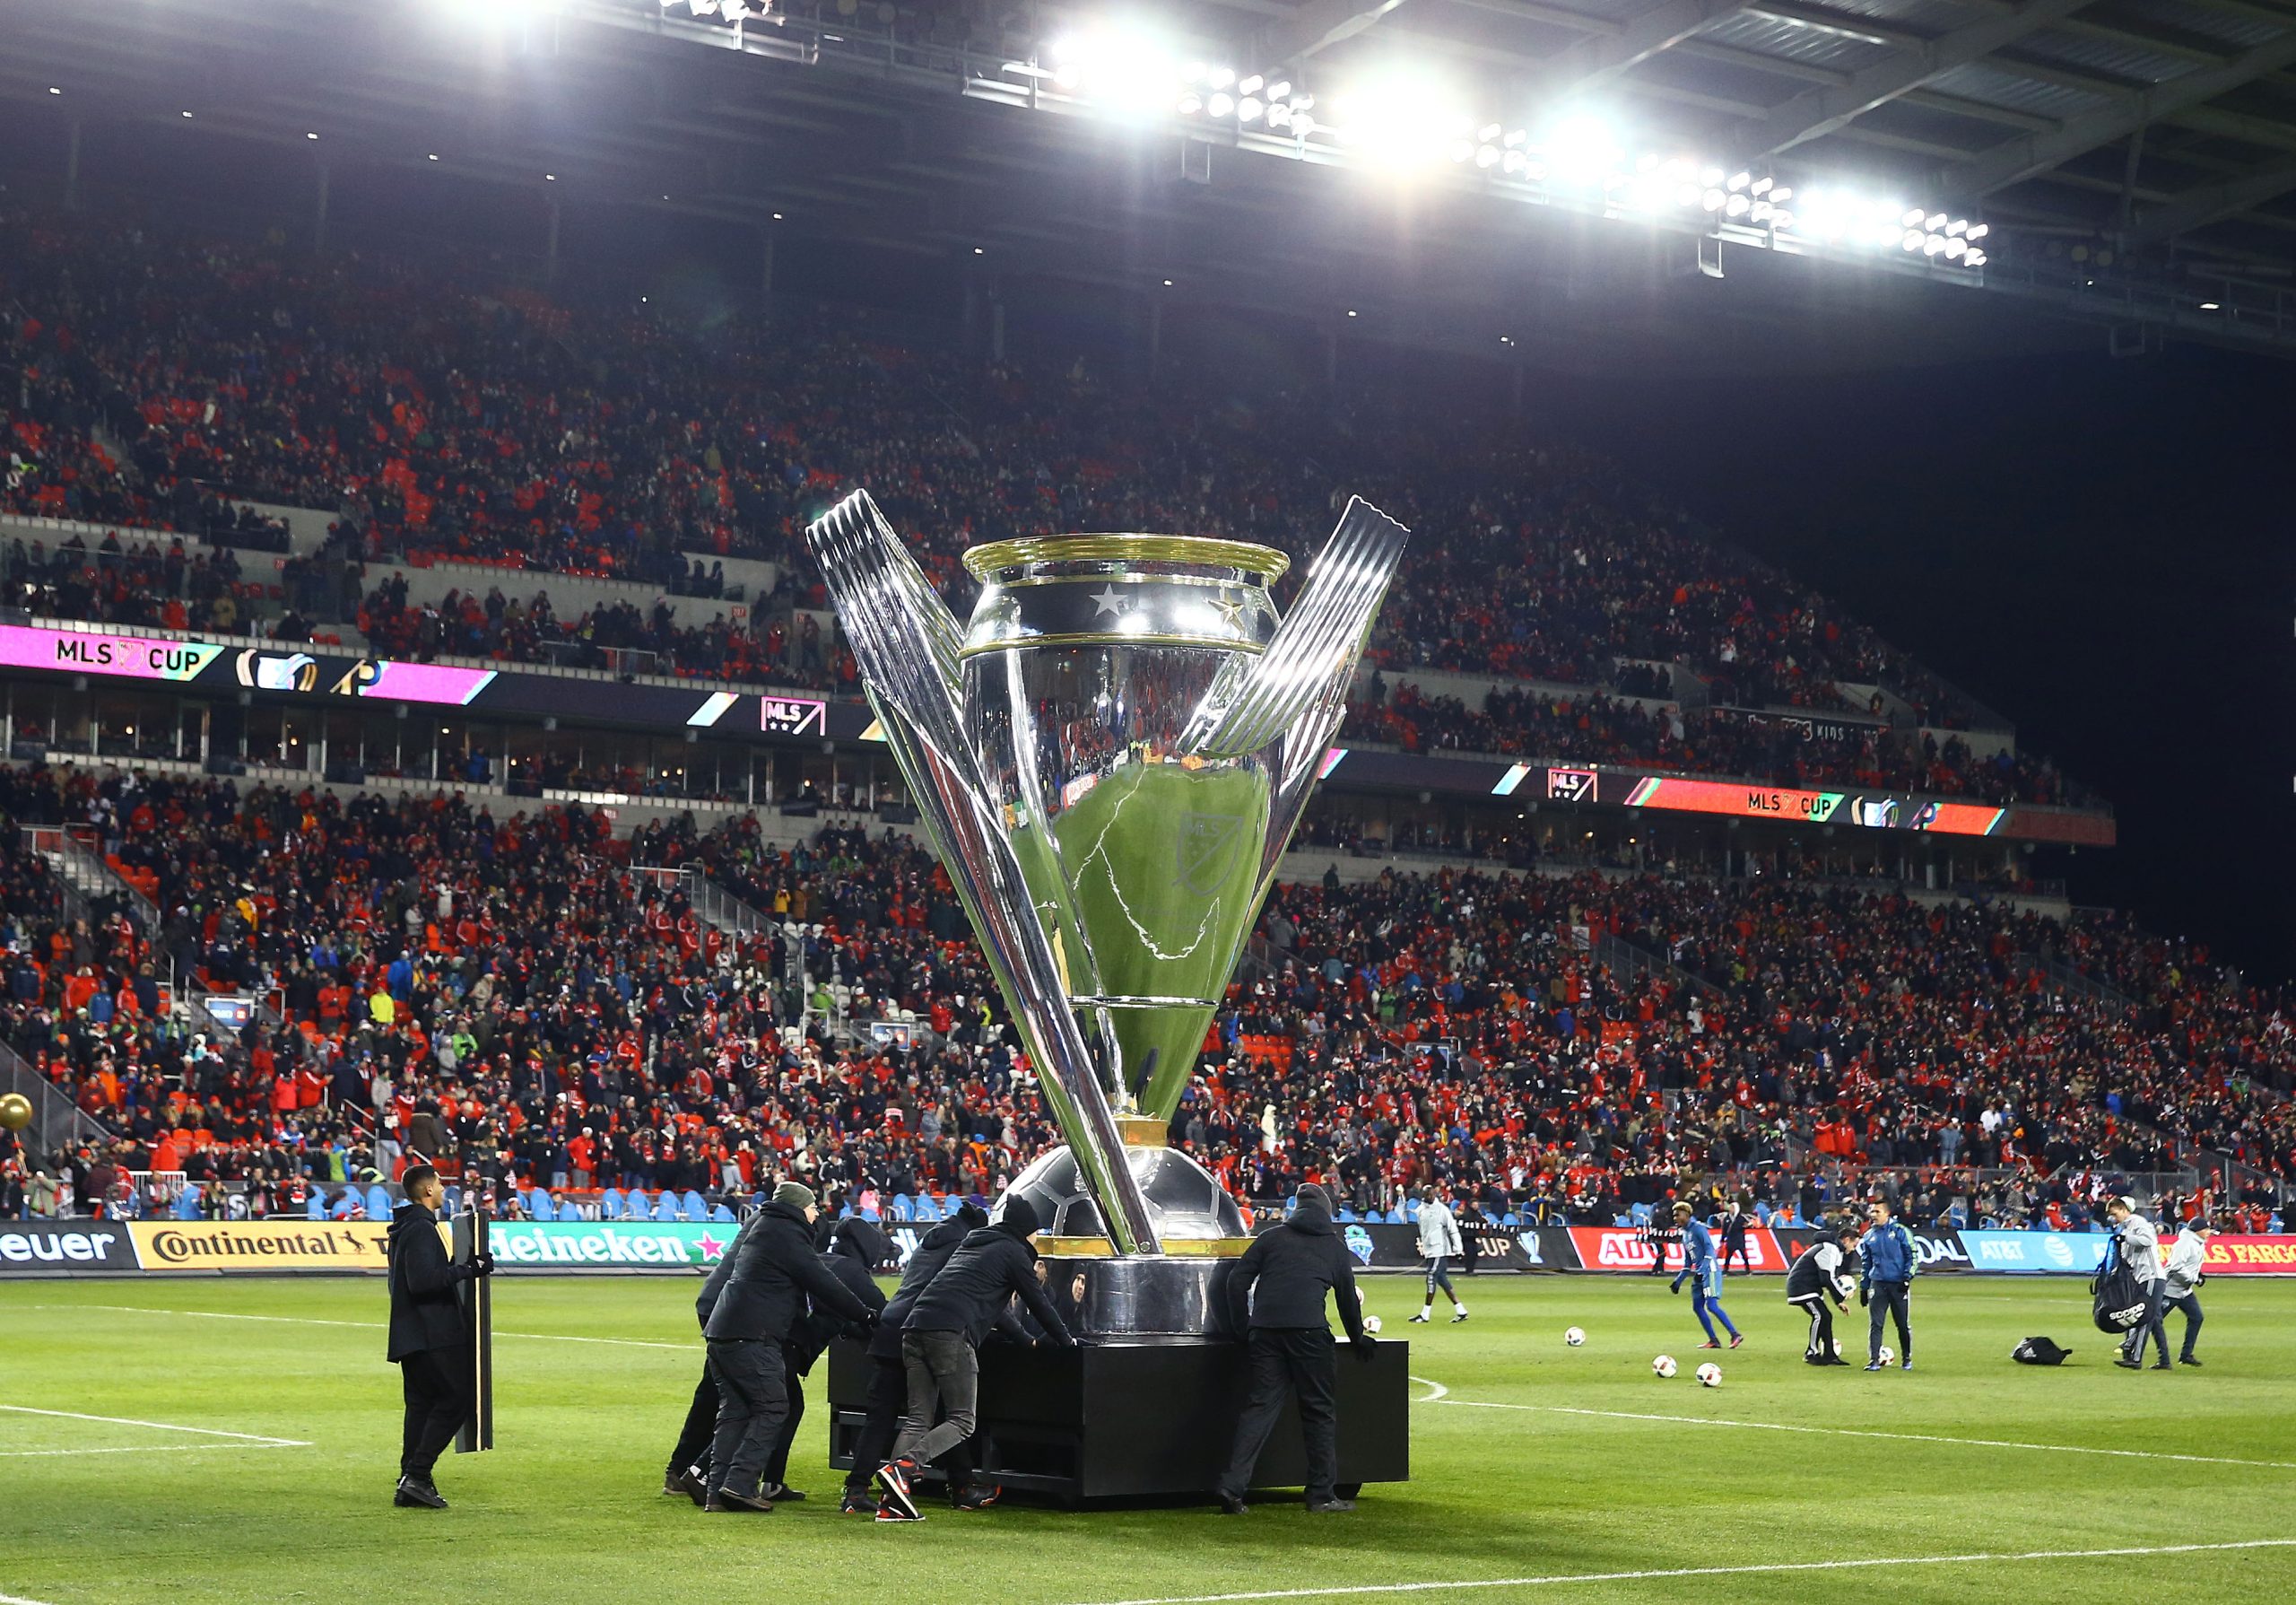 Large version of the MLS Cup on the field prior to the Major League Soccer Championship game.